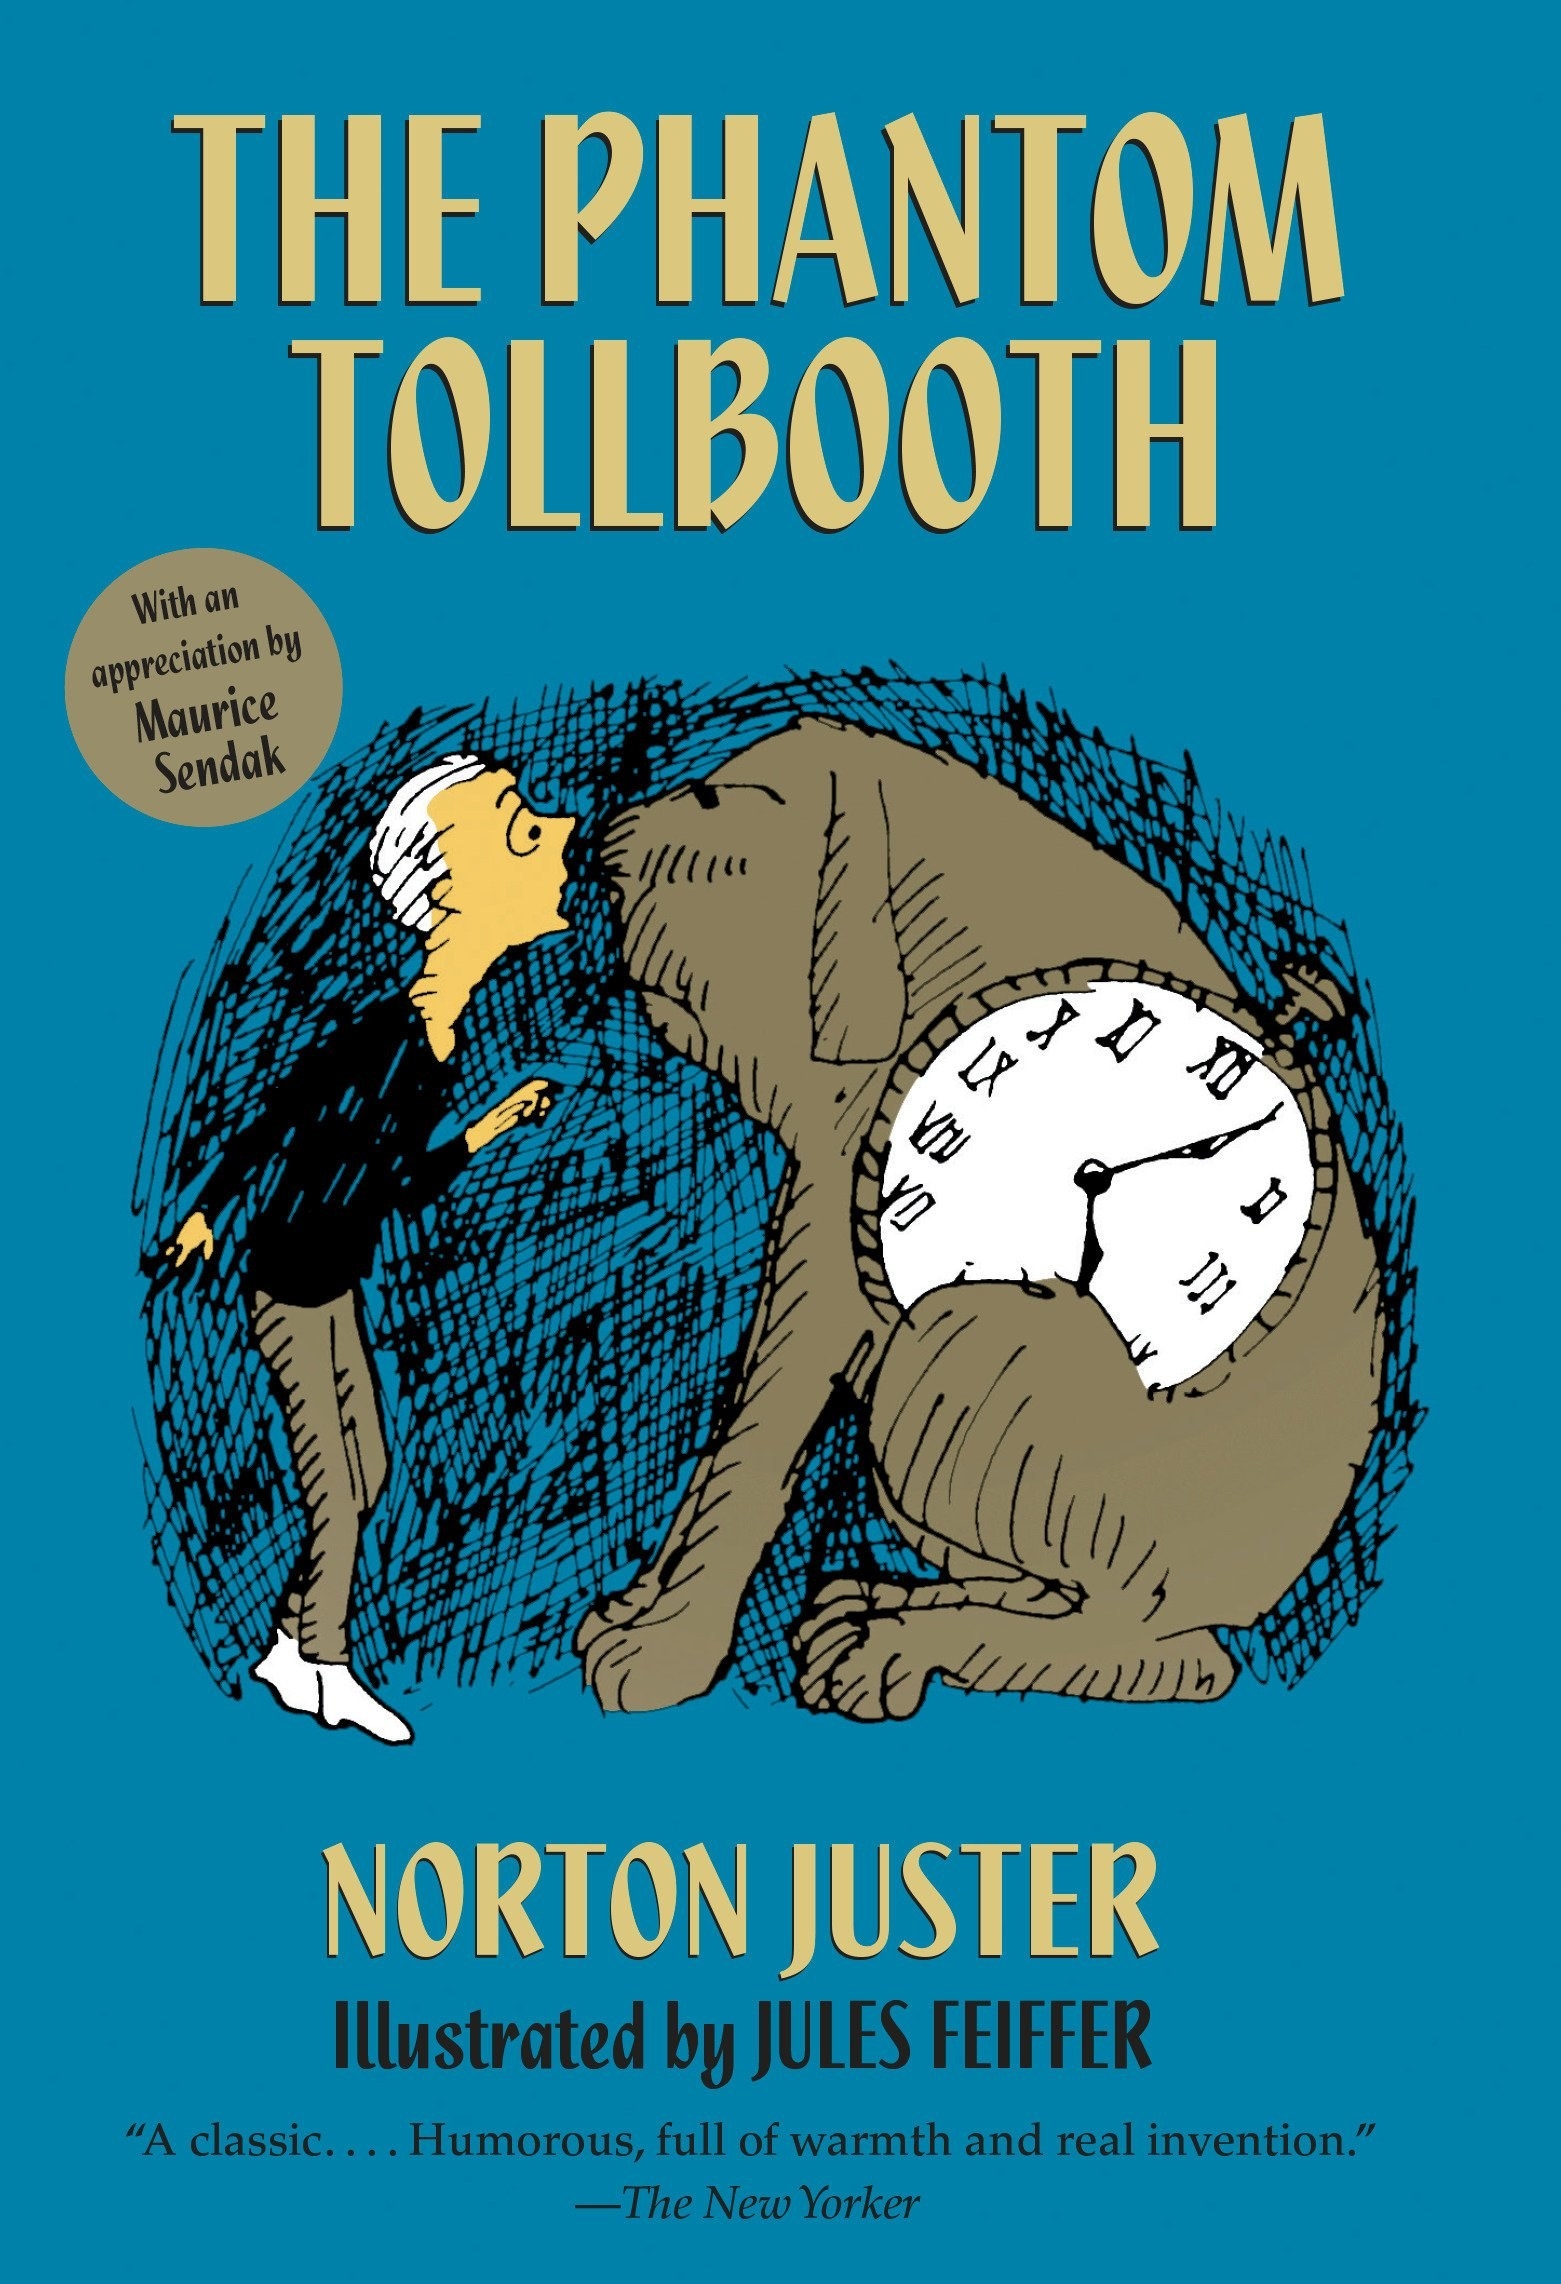 The cover of &quot;The Phantom Tollbooth&quot; by Norton Juster.